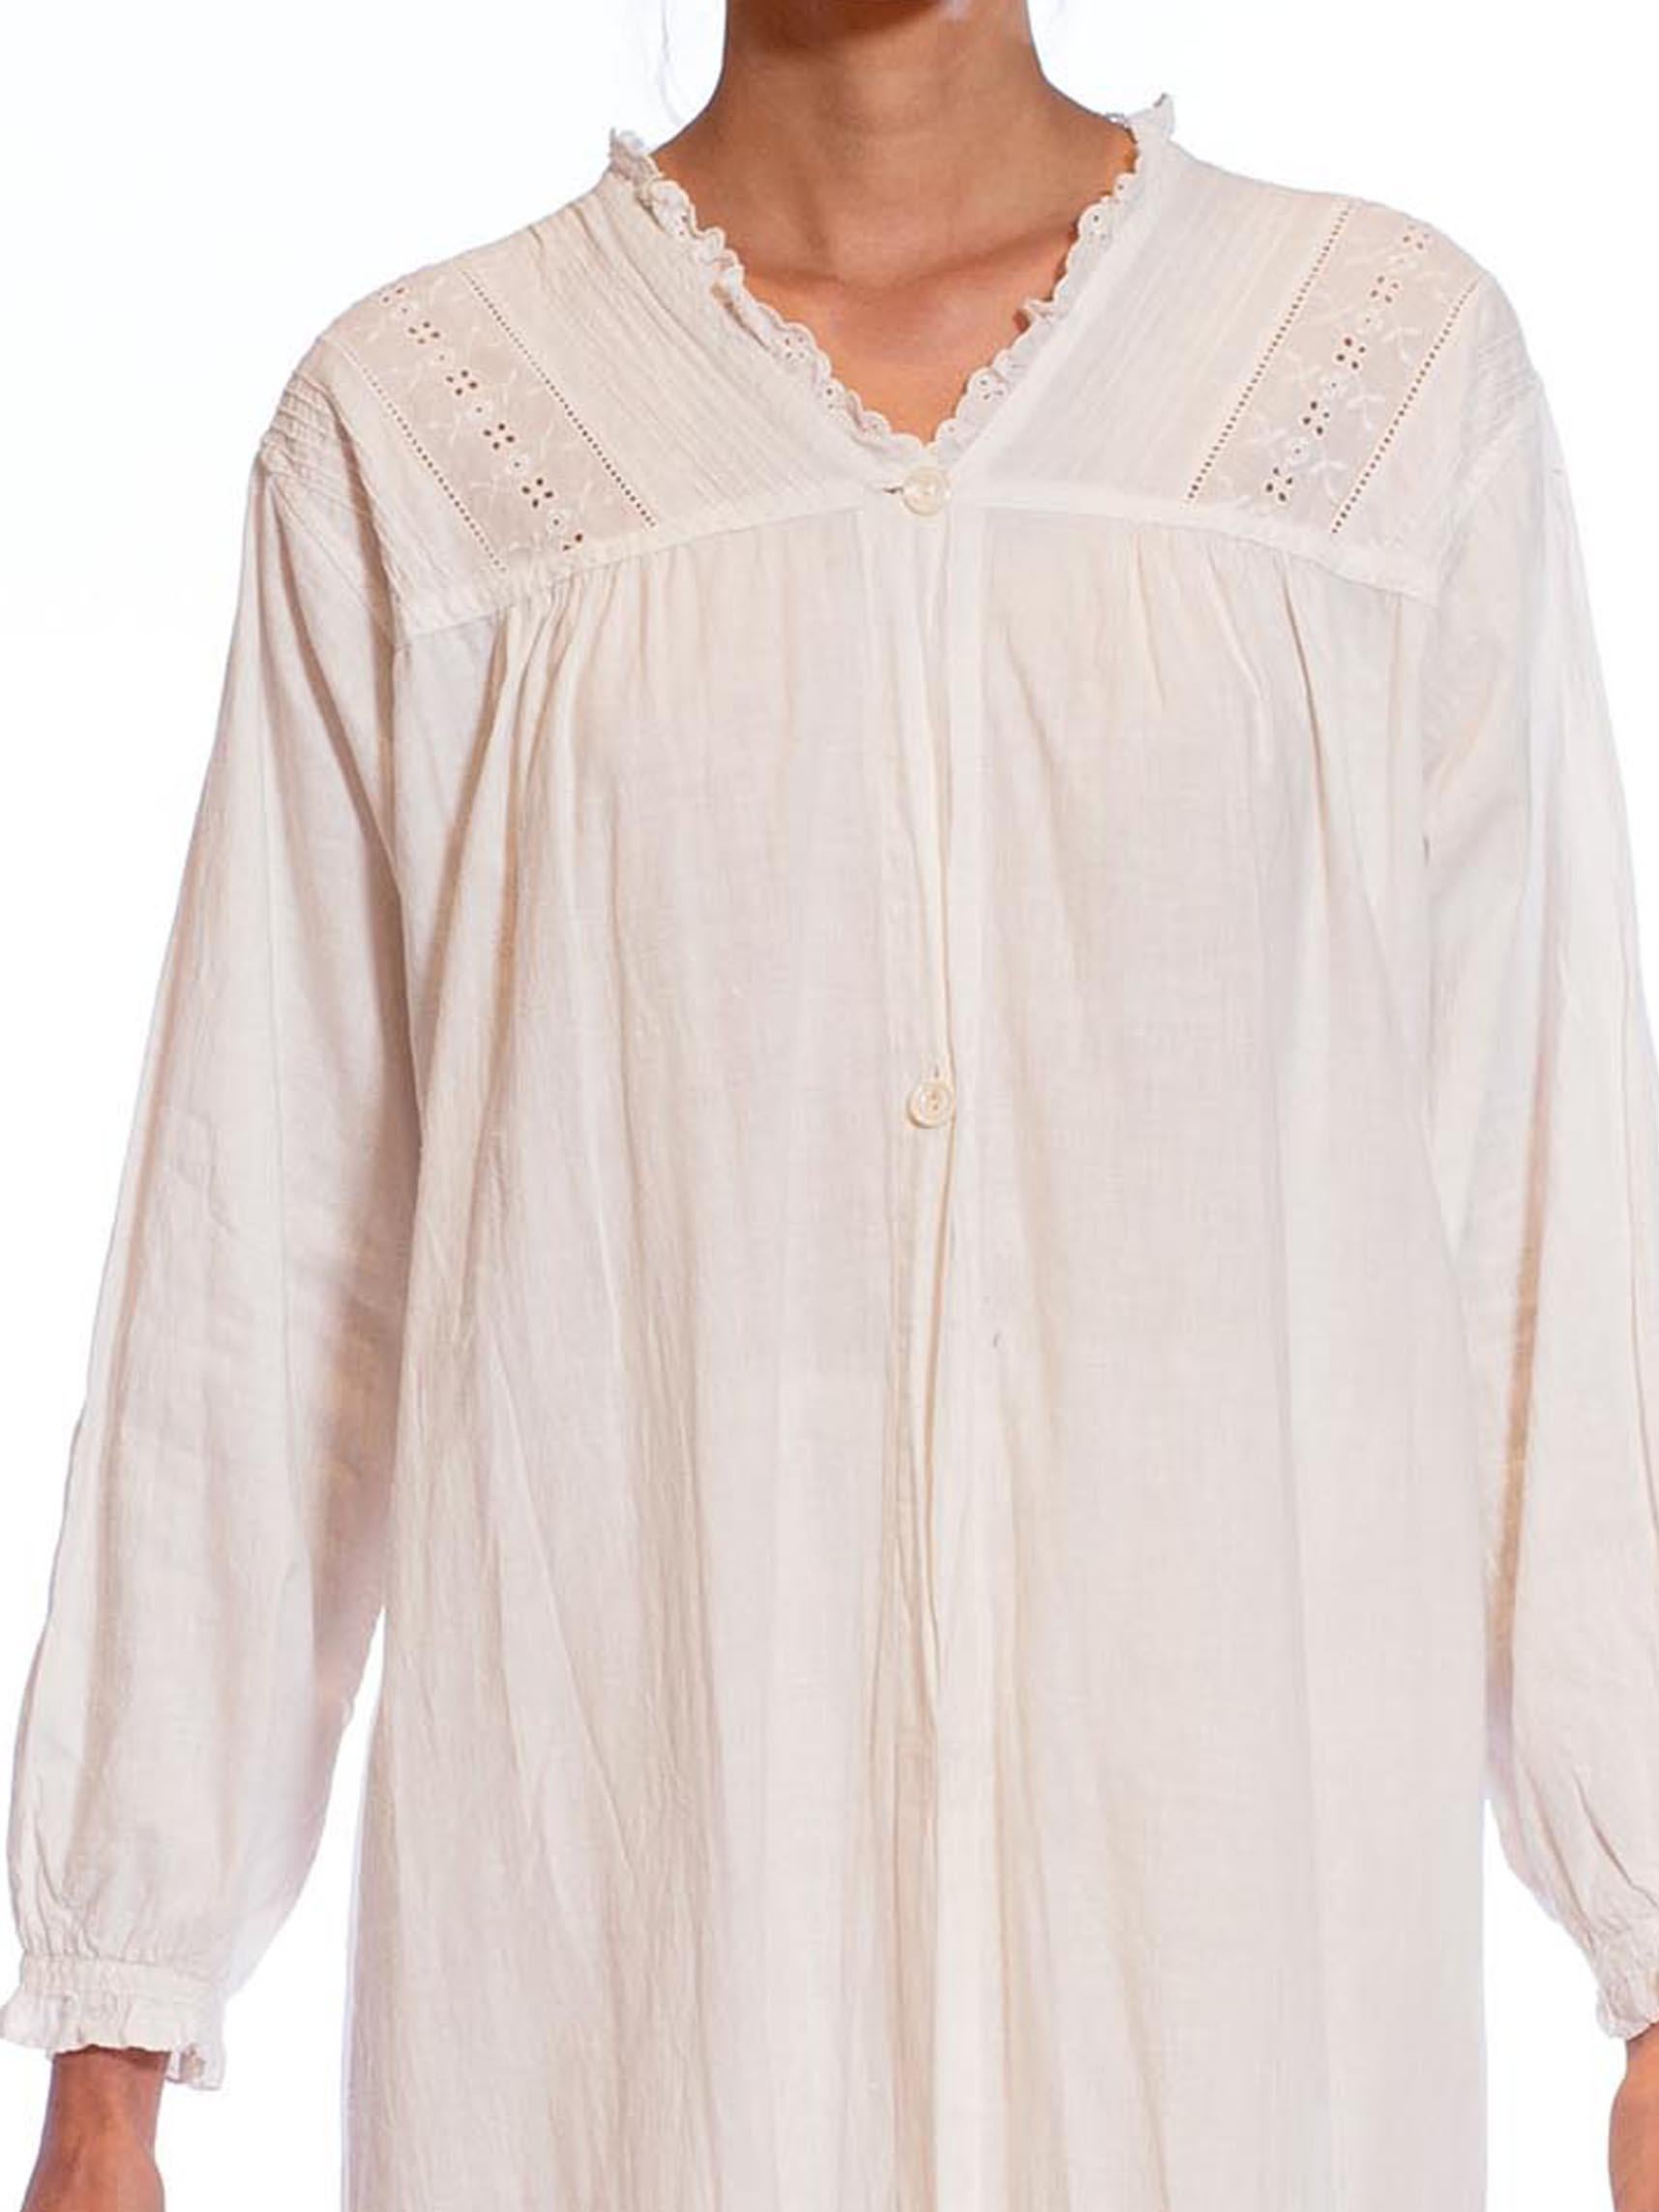 1920S White Organic Cotton Lace Trimmed Duster Robe For Sale 3